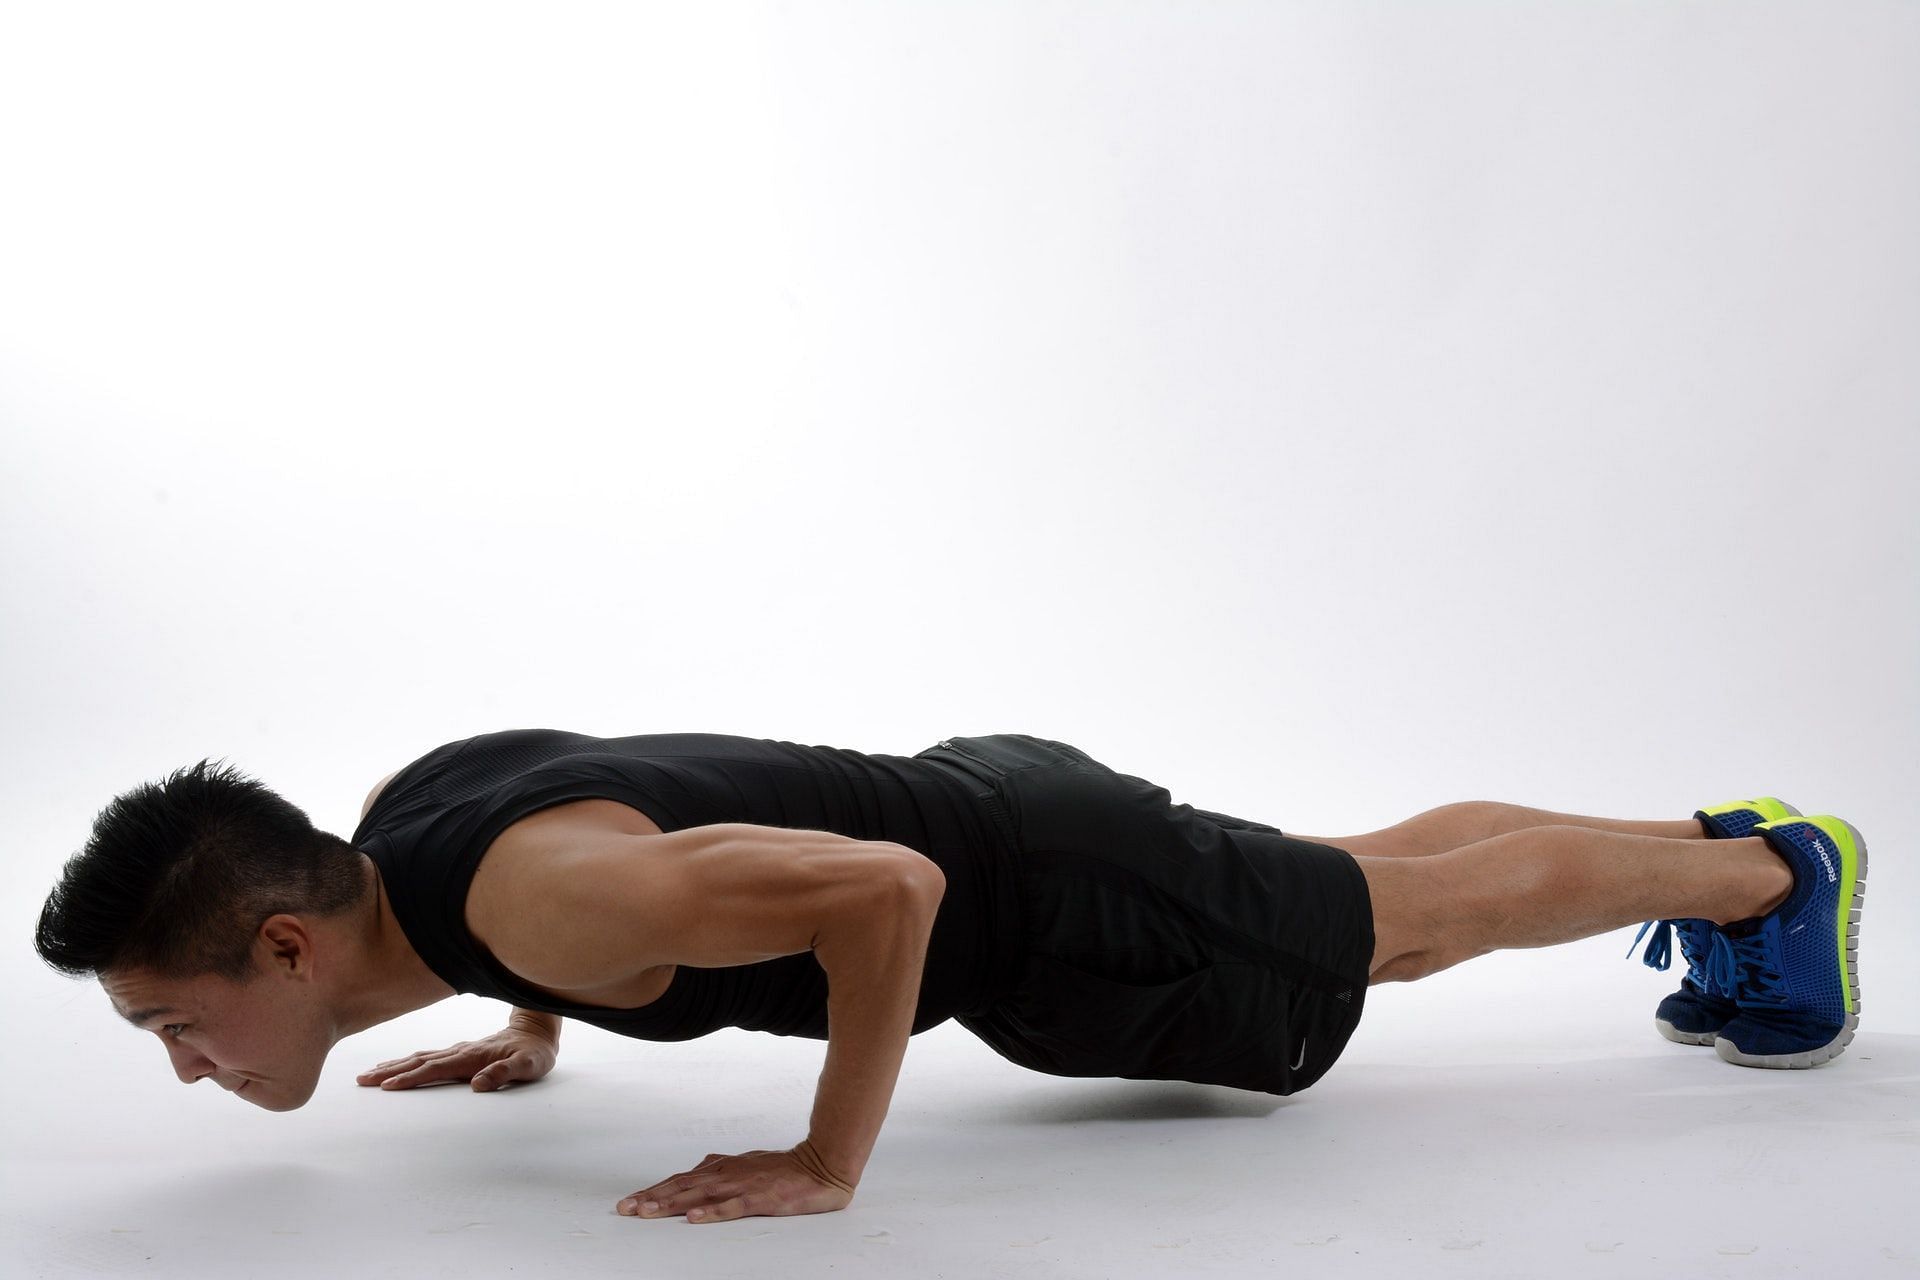 Planks vs push-ups, what's the differences, and which is better